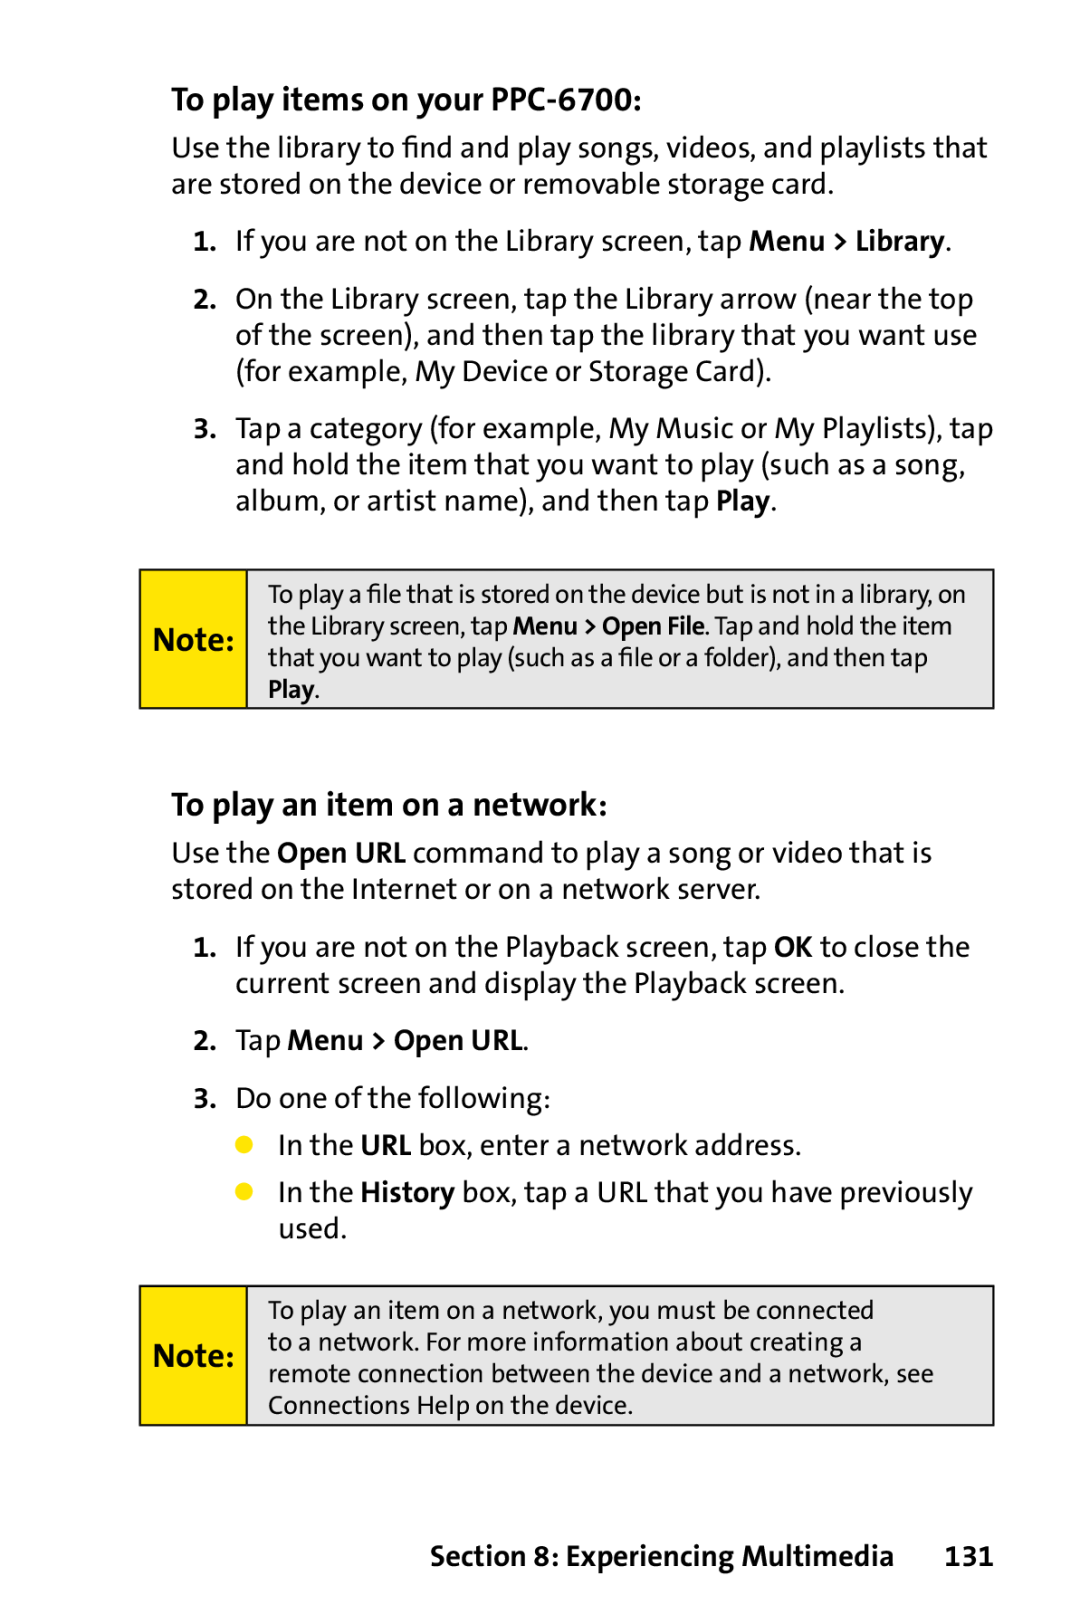 Sprint Nextel manual To play items on your PPC-6700, To play an item on a network, Tap Menu Open URL 